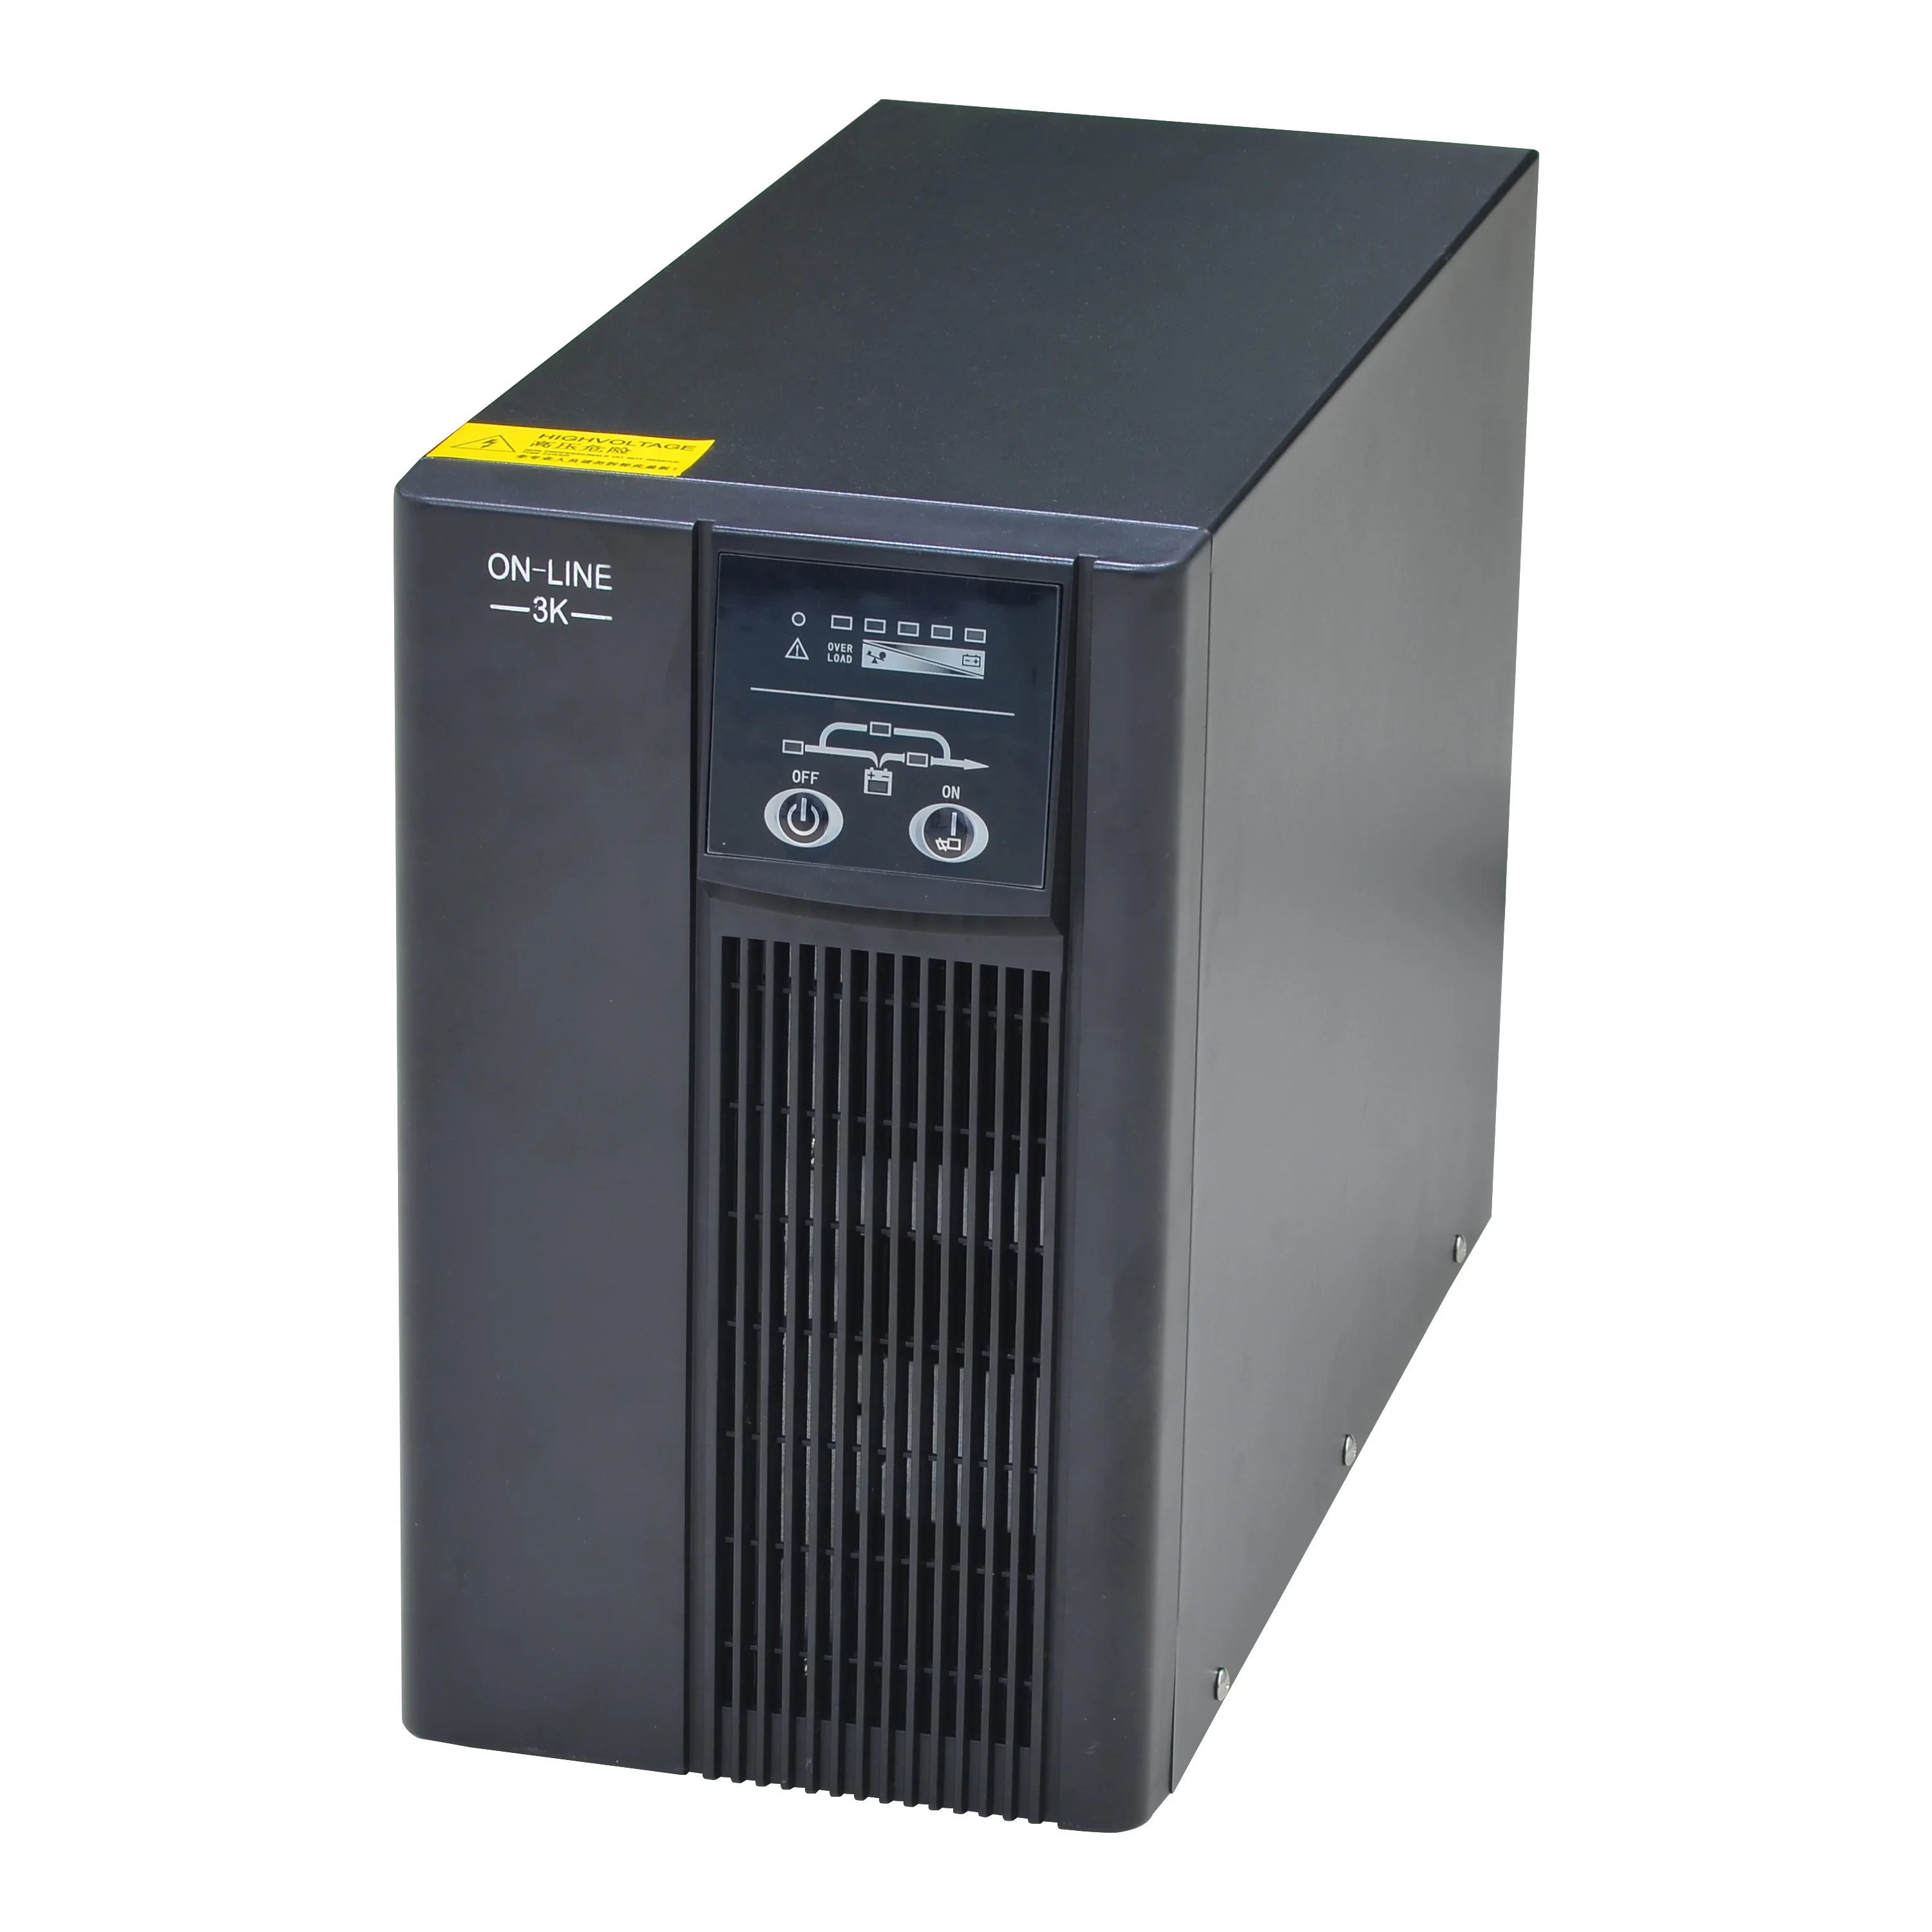 Home/office Use Online Ups,10 Ups Price,Uninterrupted Power System Power Supply - Buy Ups 10 Kva,Online Ups,Home Use Ups on Alibaba.com